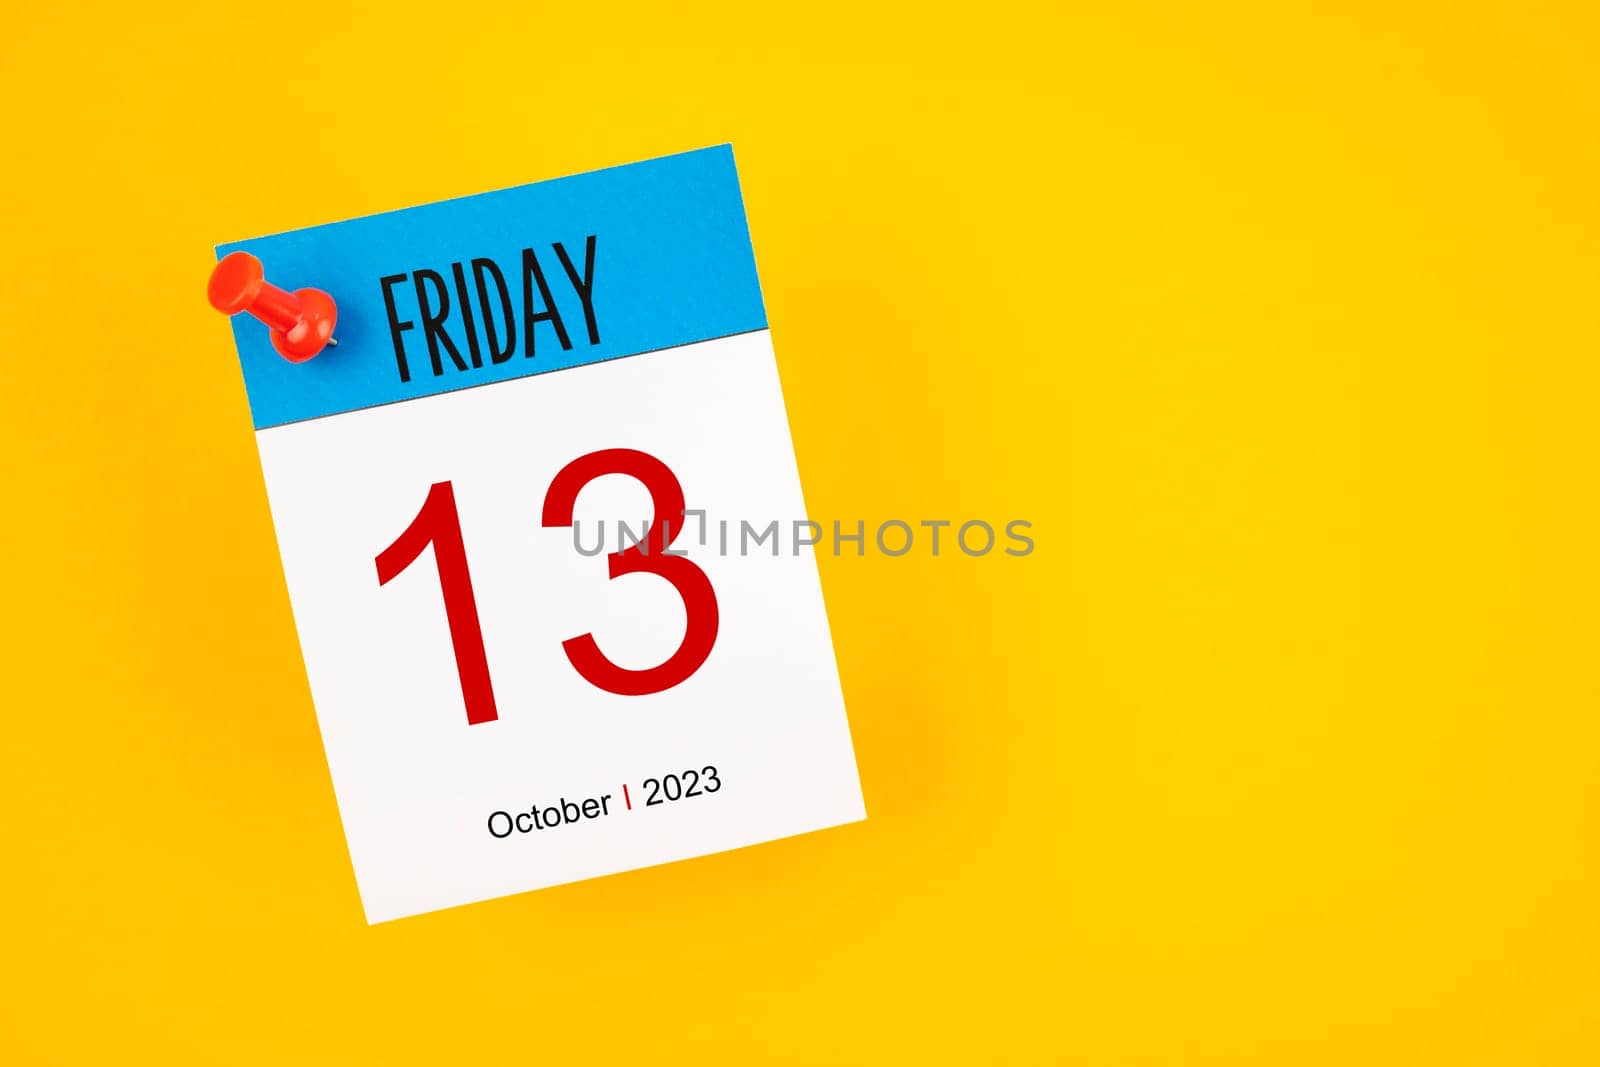 Calendar Friday the 13th October 2023 and push pin on yellow. by Gamjai